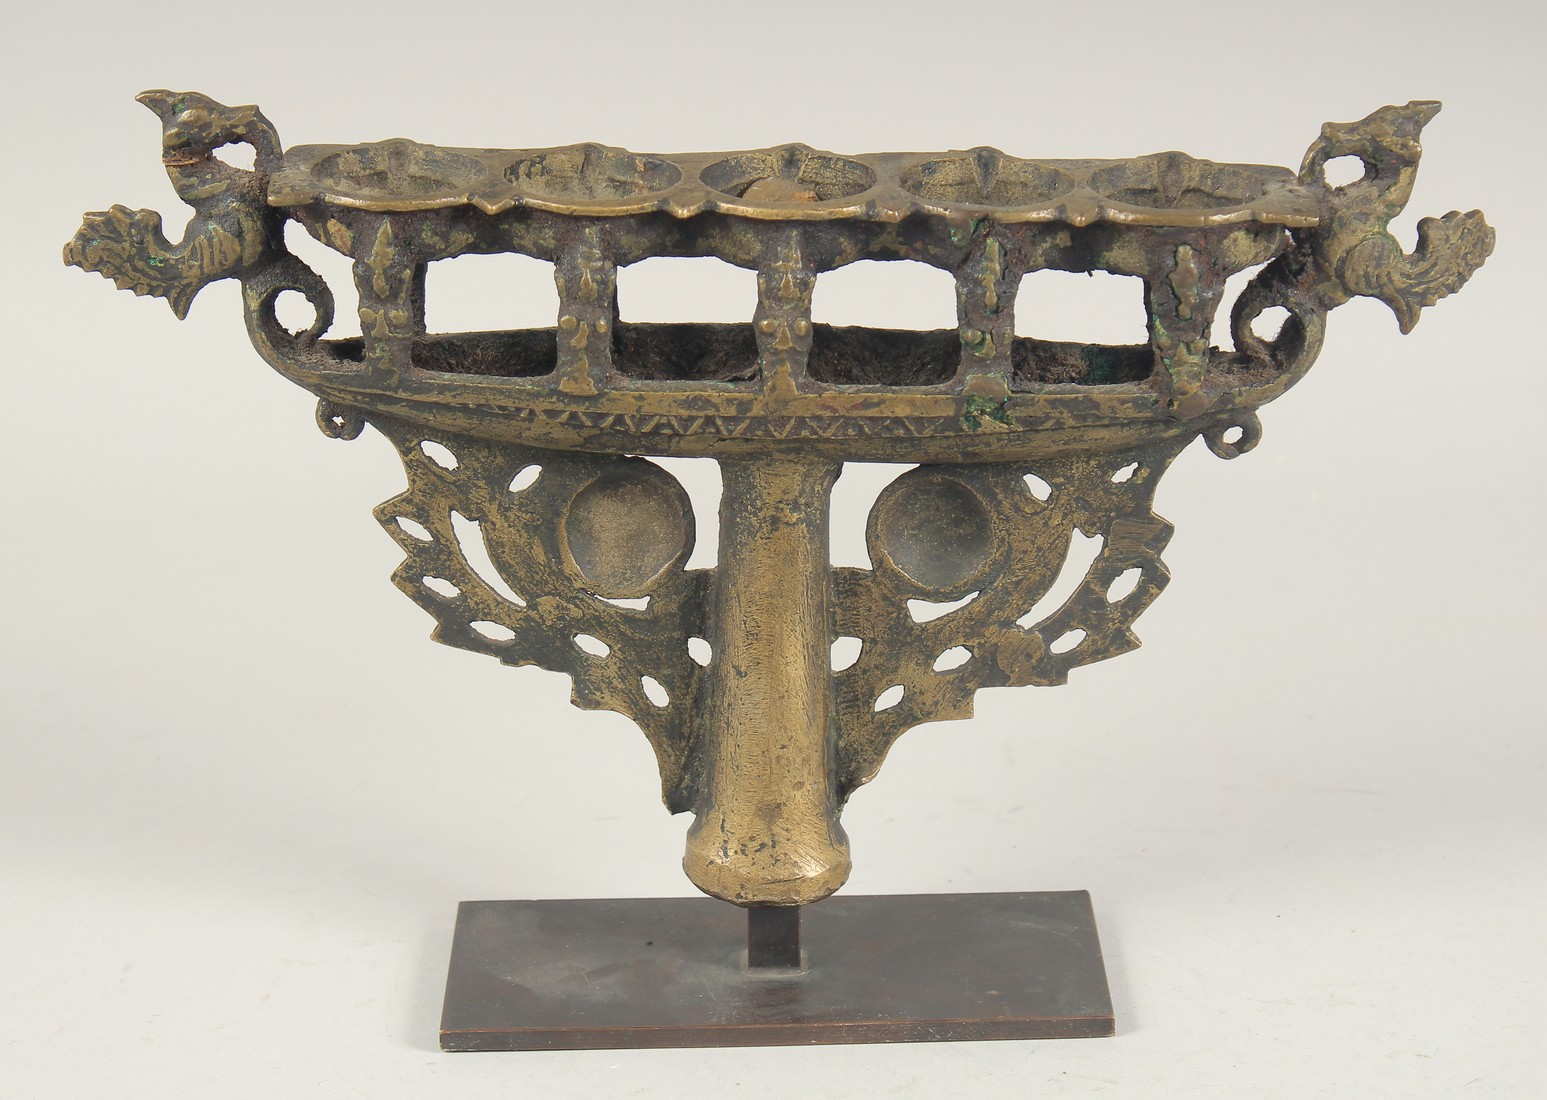 AN ISLAMIC CAST BRONZE FIVE BURNER CANDLESTICK, mounted to a later stand, 31cm wide.